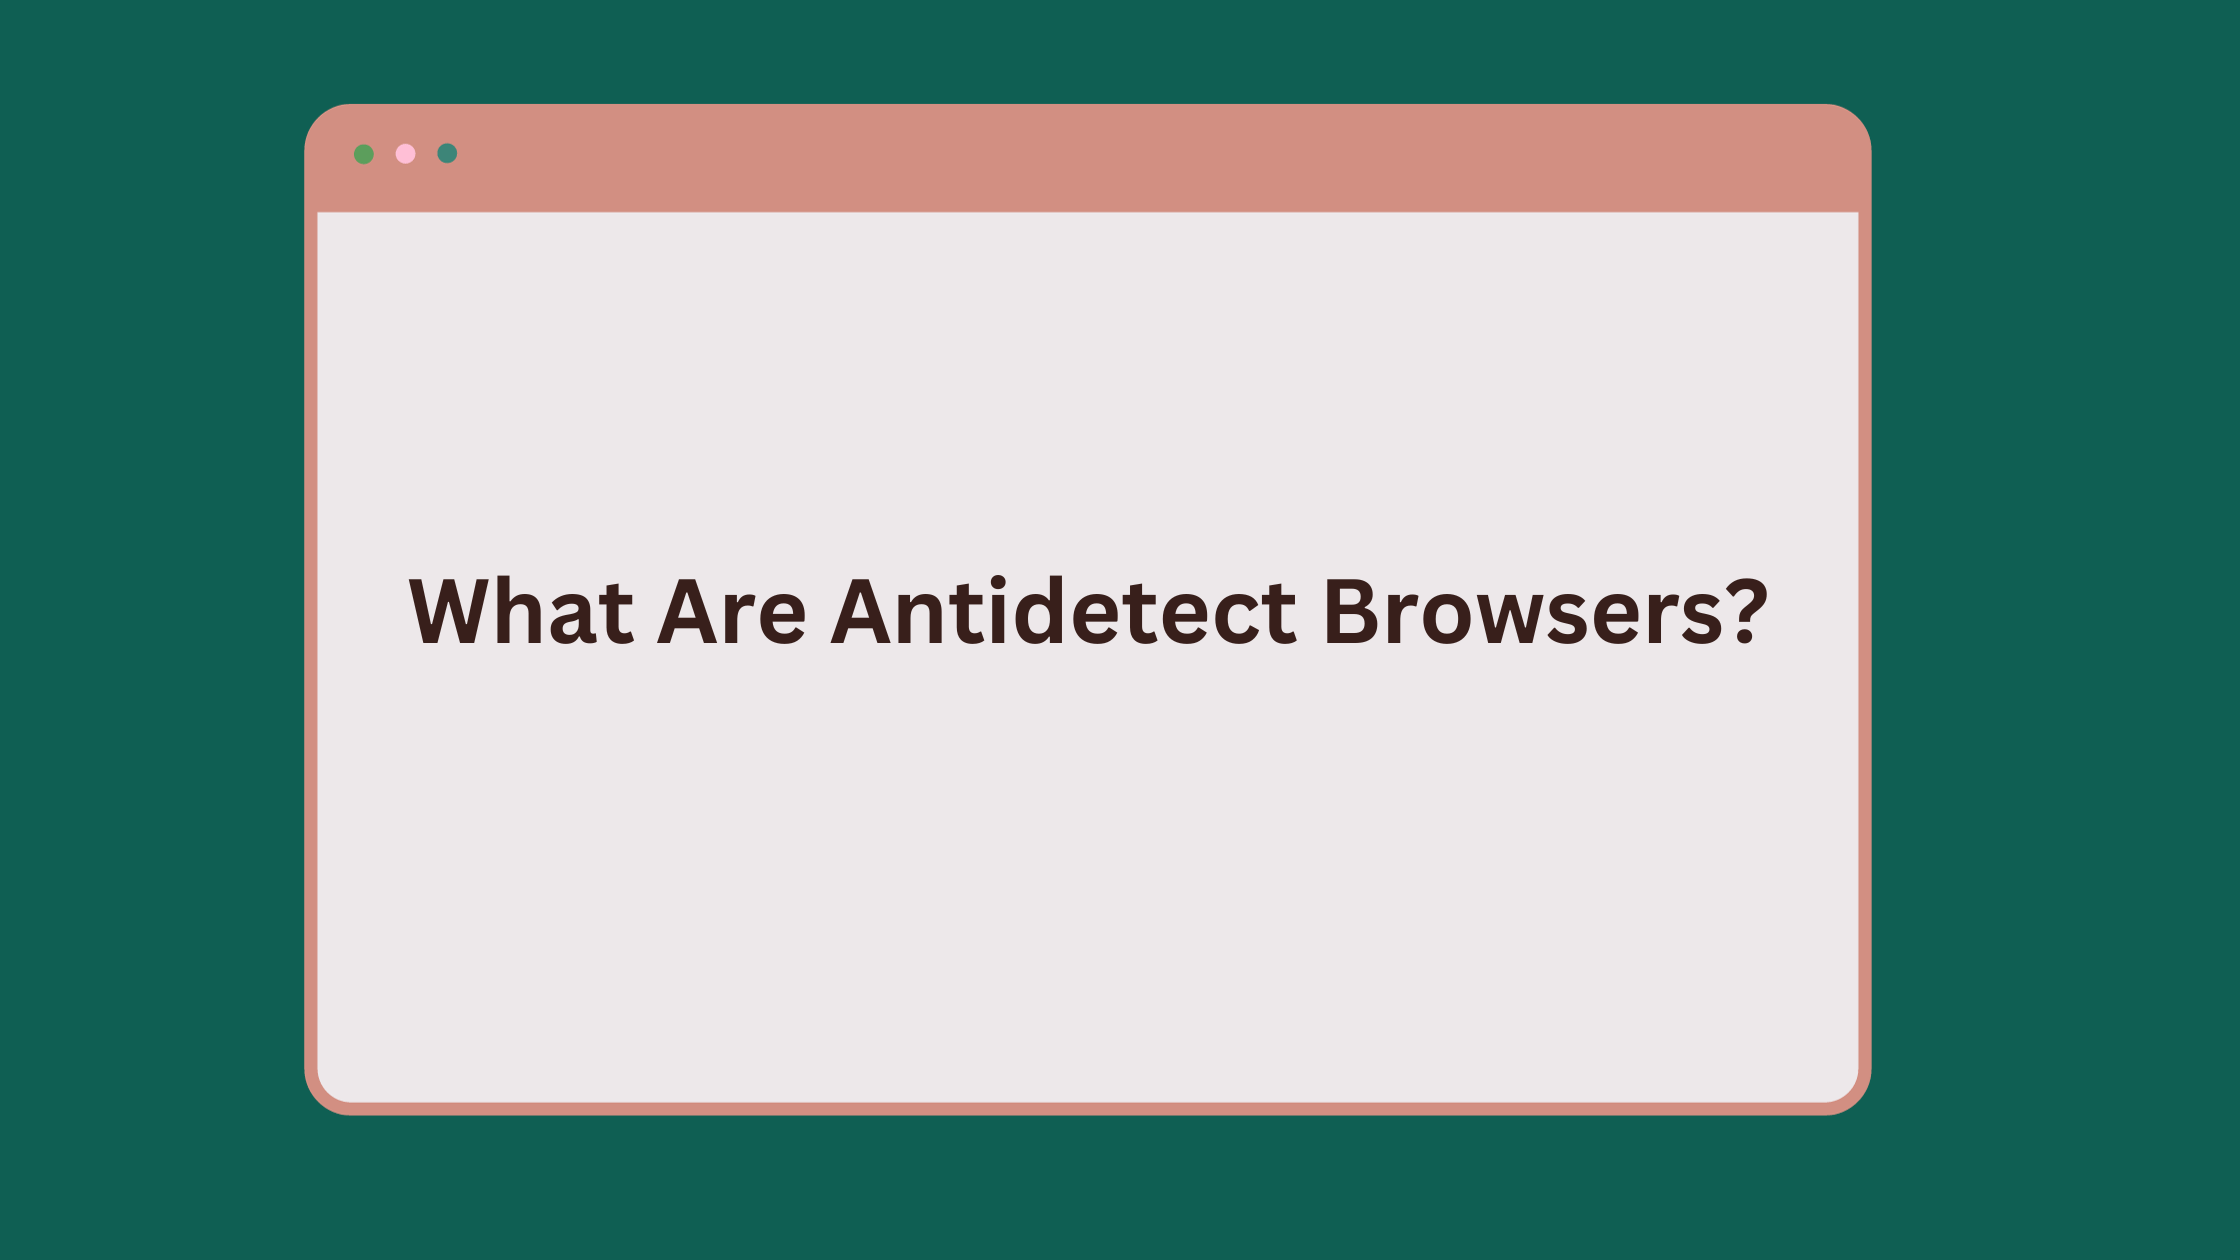 What Are Antidetect Browsers?